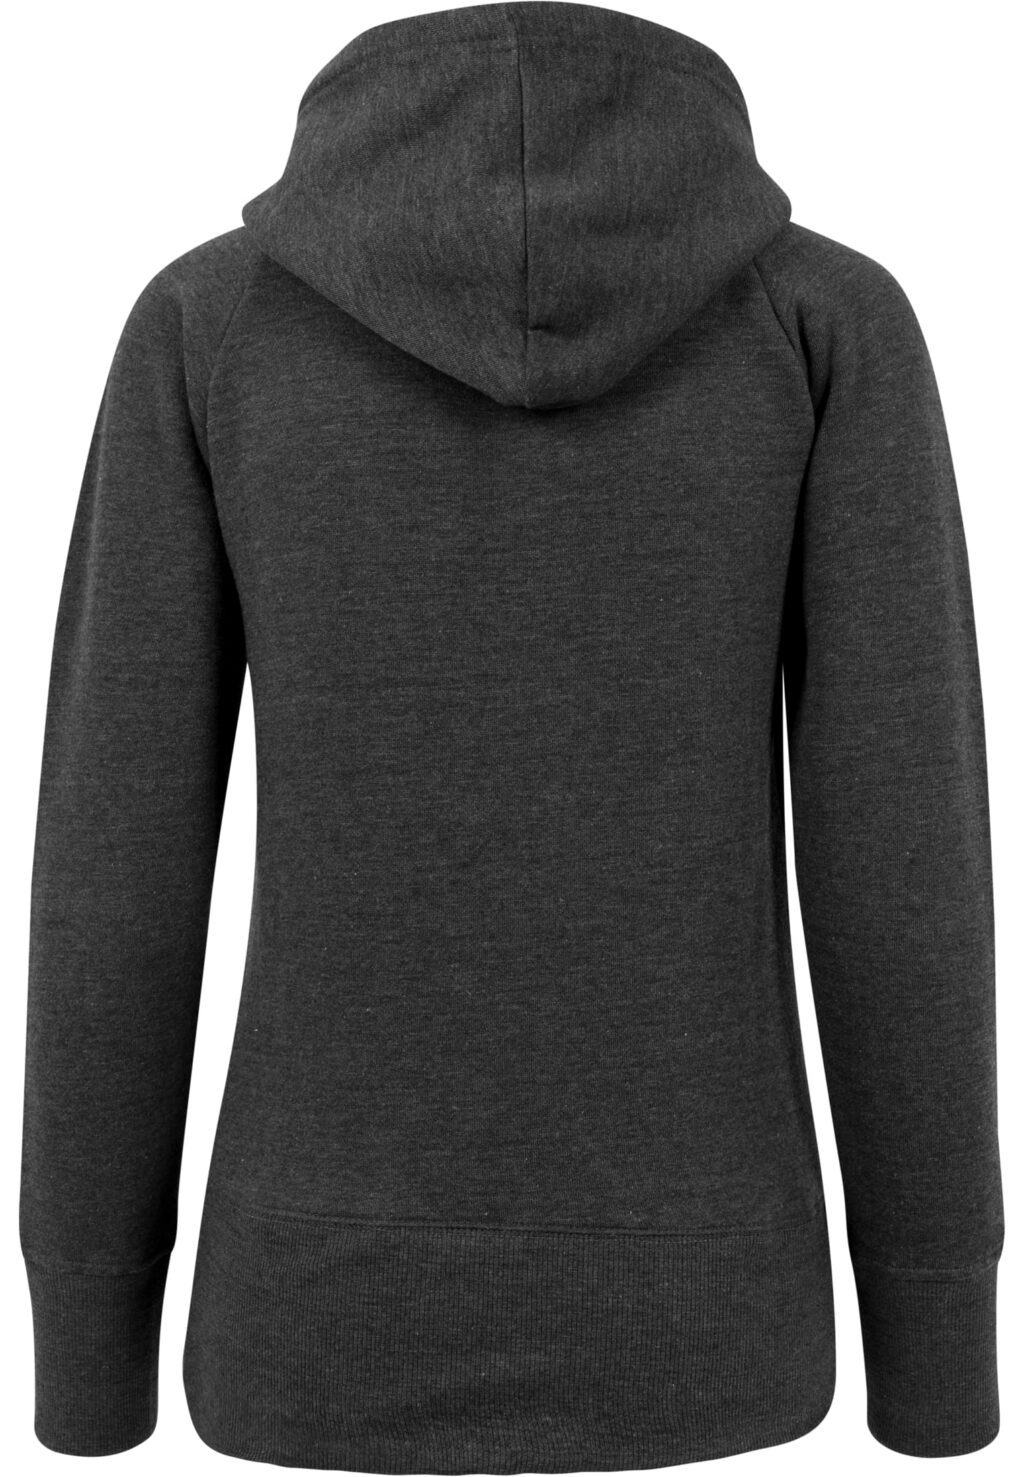 Ladies Waiting For Friday Hoody charcoal MT2527